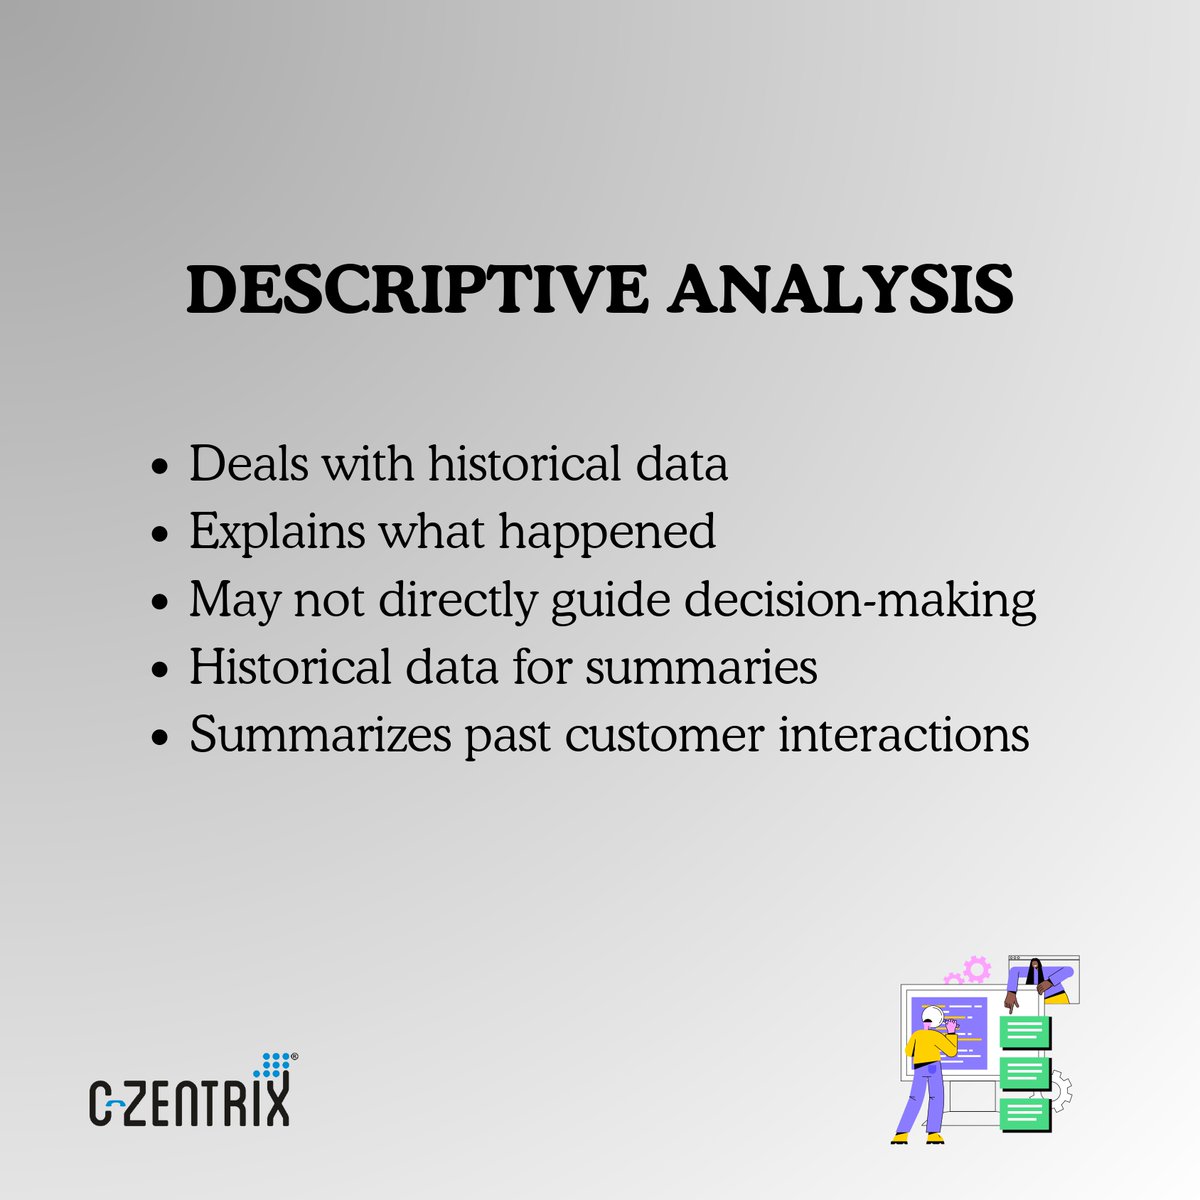 Unlocking the Potential: How Different Analytics Types Shape Customer Service Excellence 🔓🌐

For More - c-zentrix.com/NkEQBMl

#CustomerAnalytics #PredictiveAnalytics #CustomerService #Prediction #CustomerExcellence